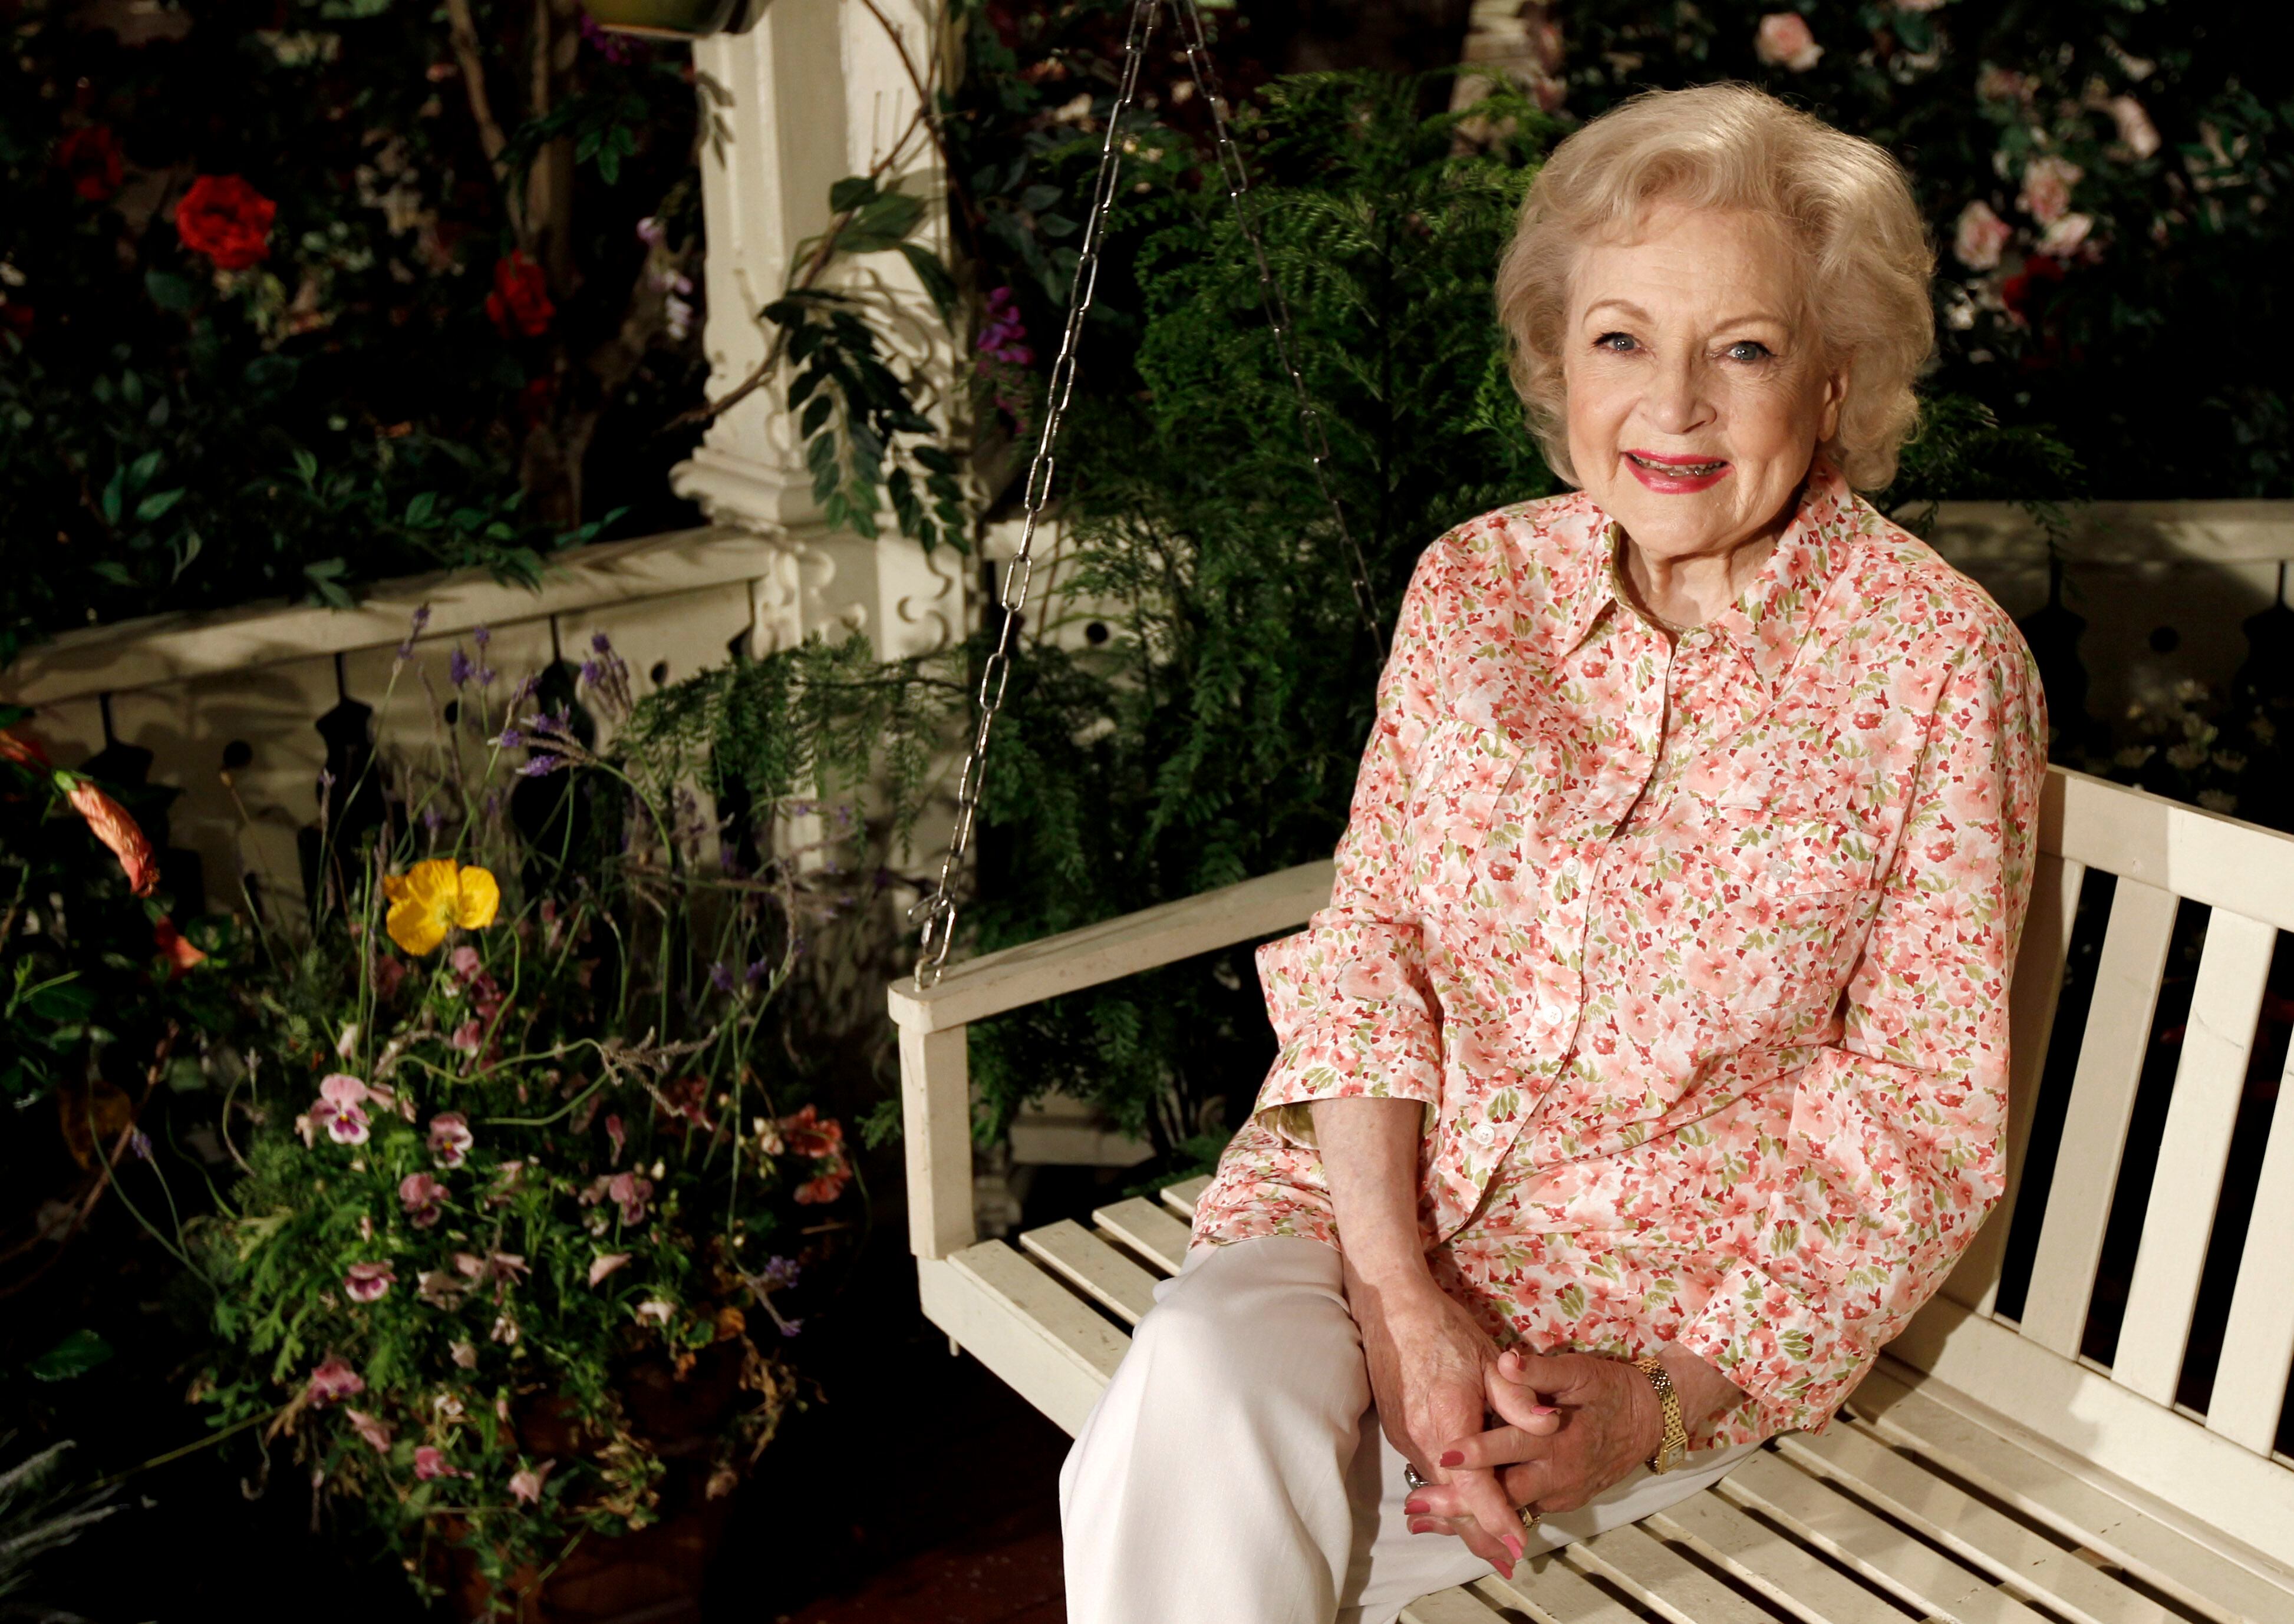 Actors, comedians and president react to Betty White’s death